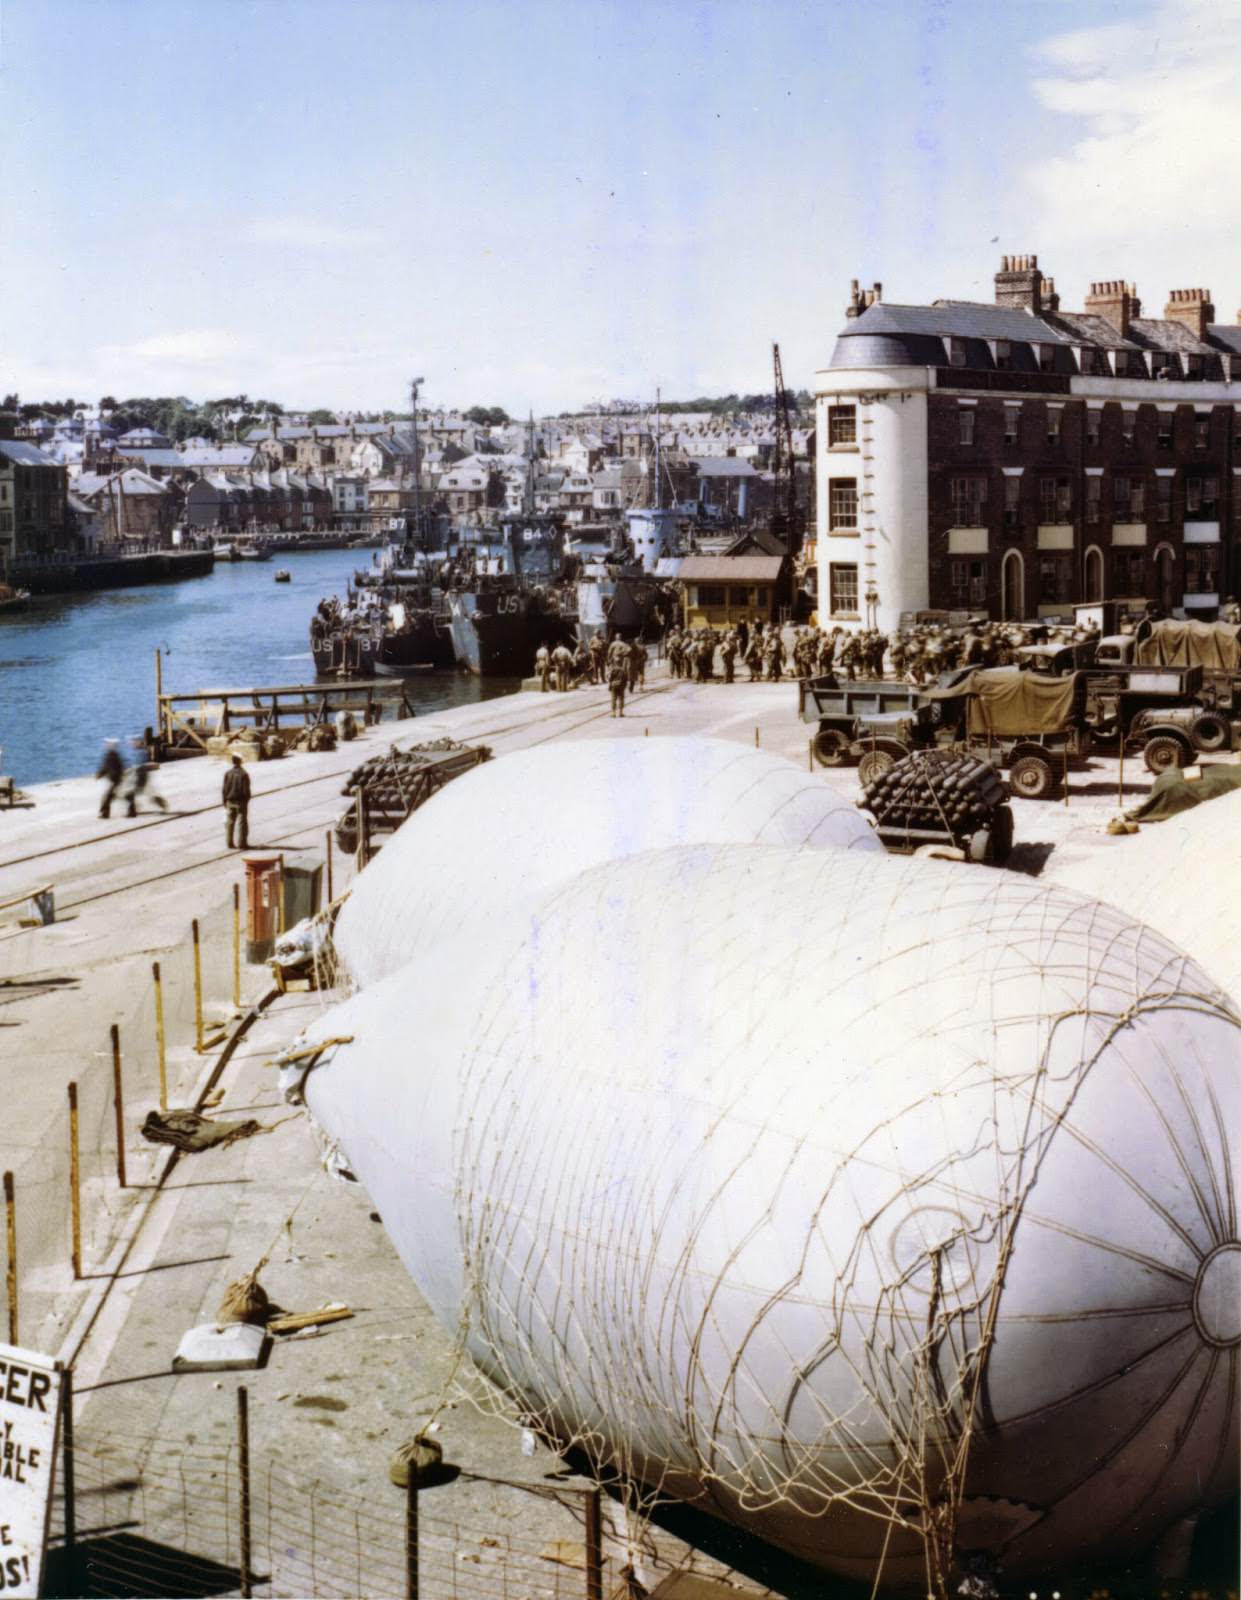 American troops load onto LSIs at a port in Britain where barrage balloons have been anchored for protection against strafing and low level bombings.